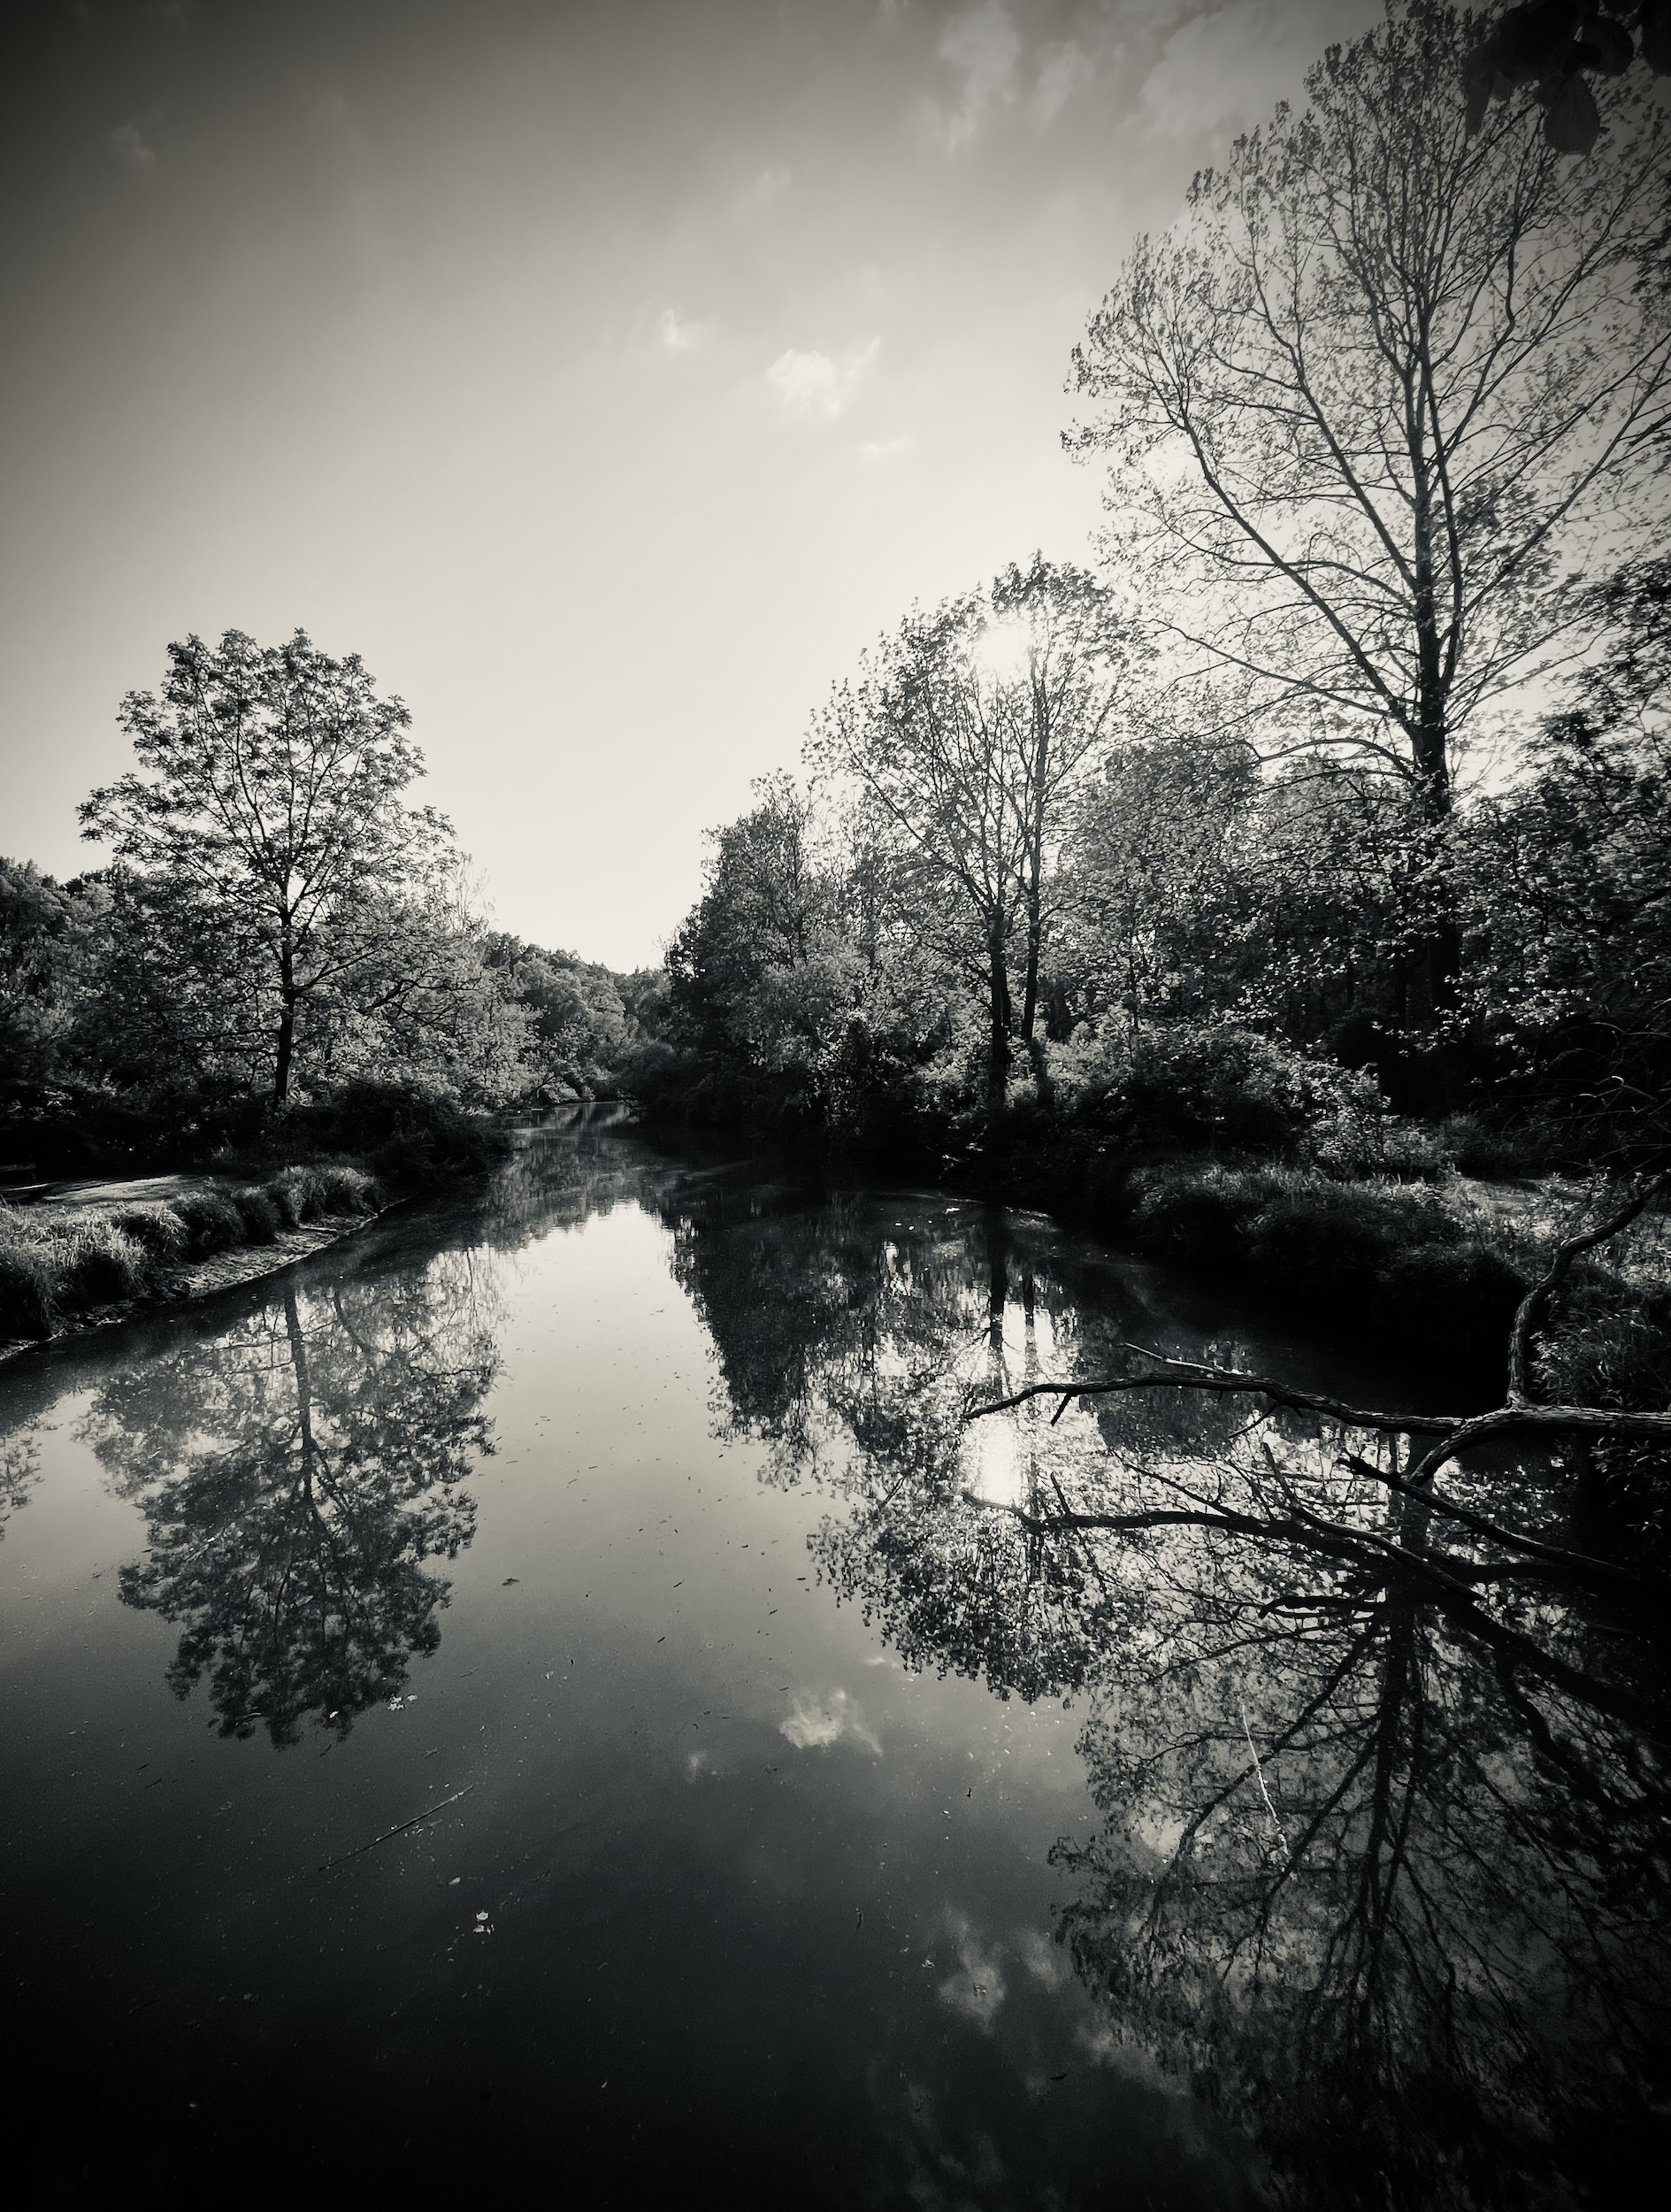 a black and white photo of trees reflected in a still body of water